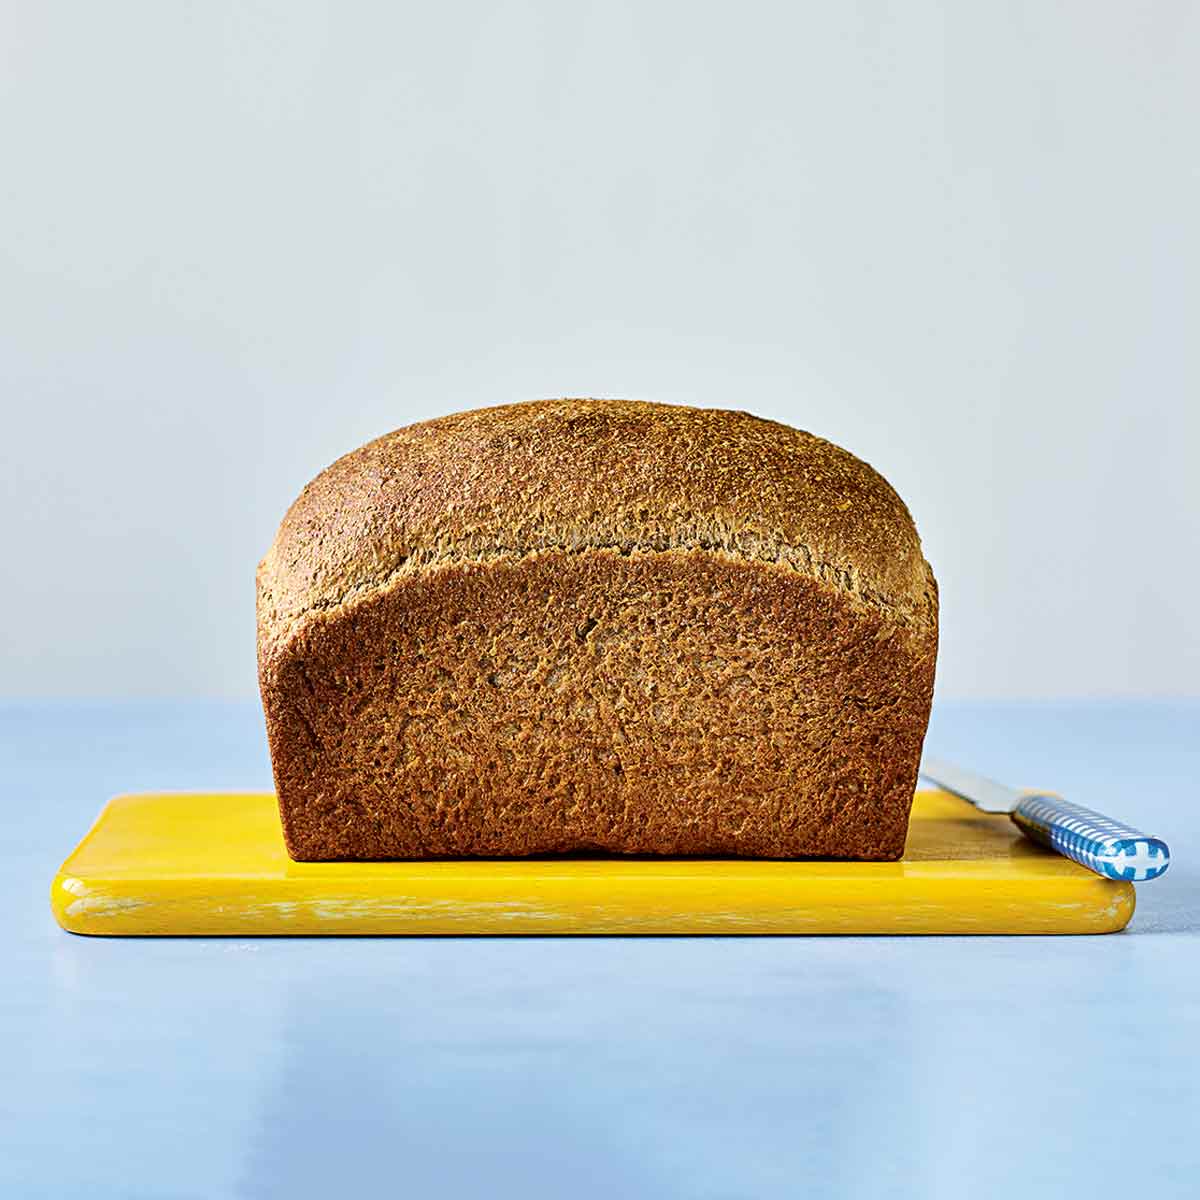 A loaf of unsliced whole wheat bread sitting on a yellow cutting board with a blue-handled knife beside it